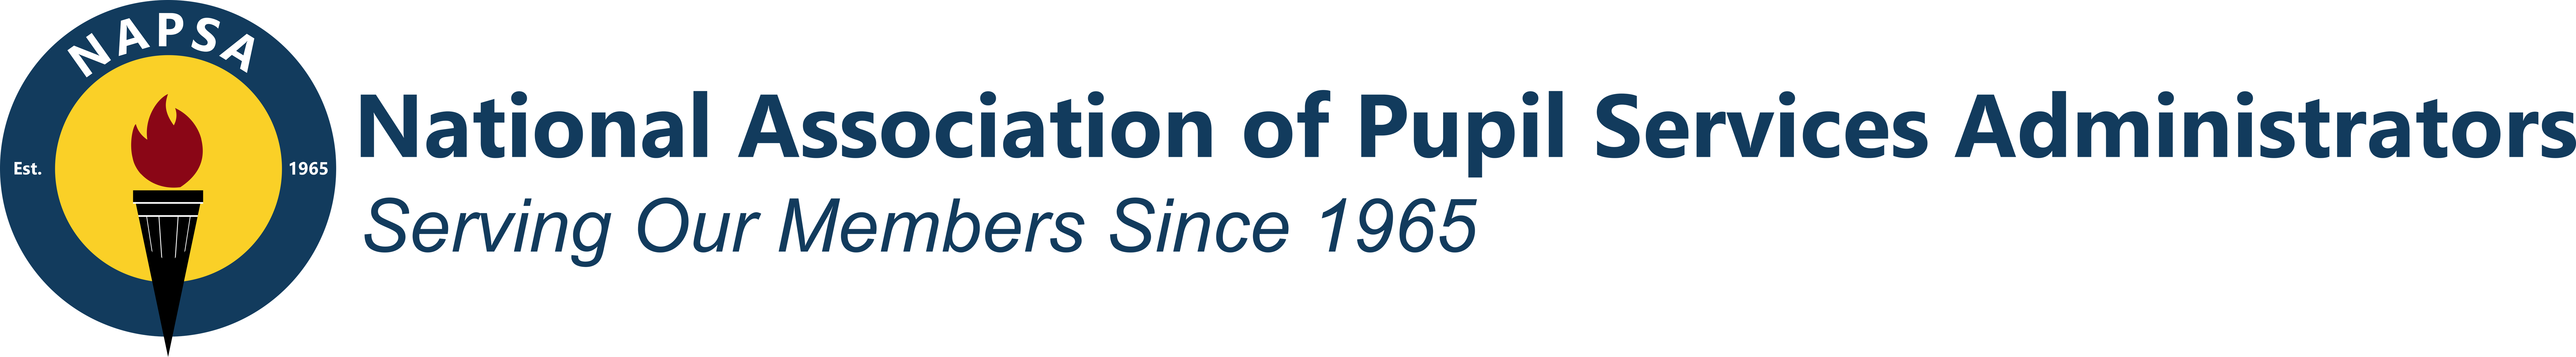 National Association of Pupil Services Administrators Serving Our Members Since 1965 Logo